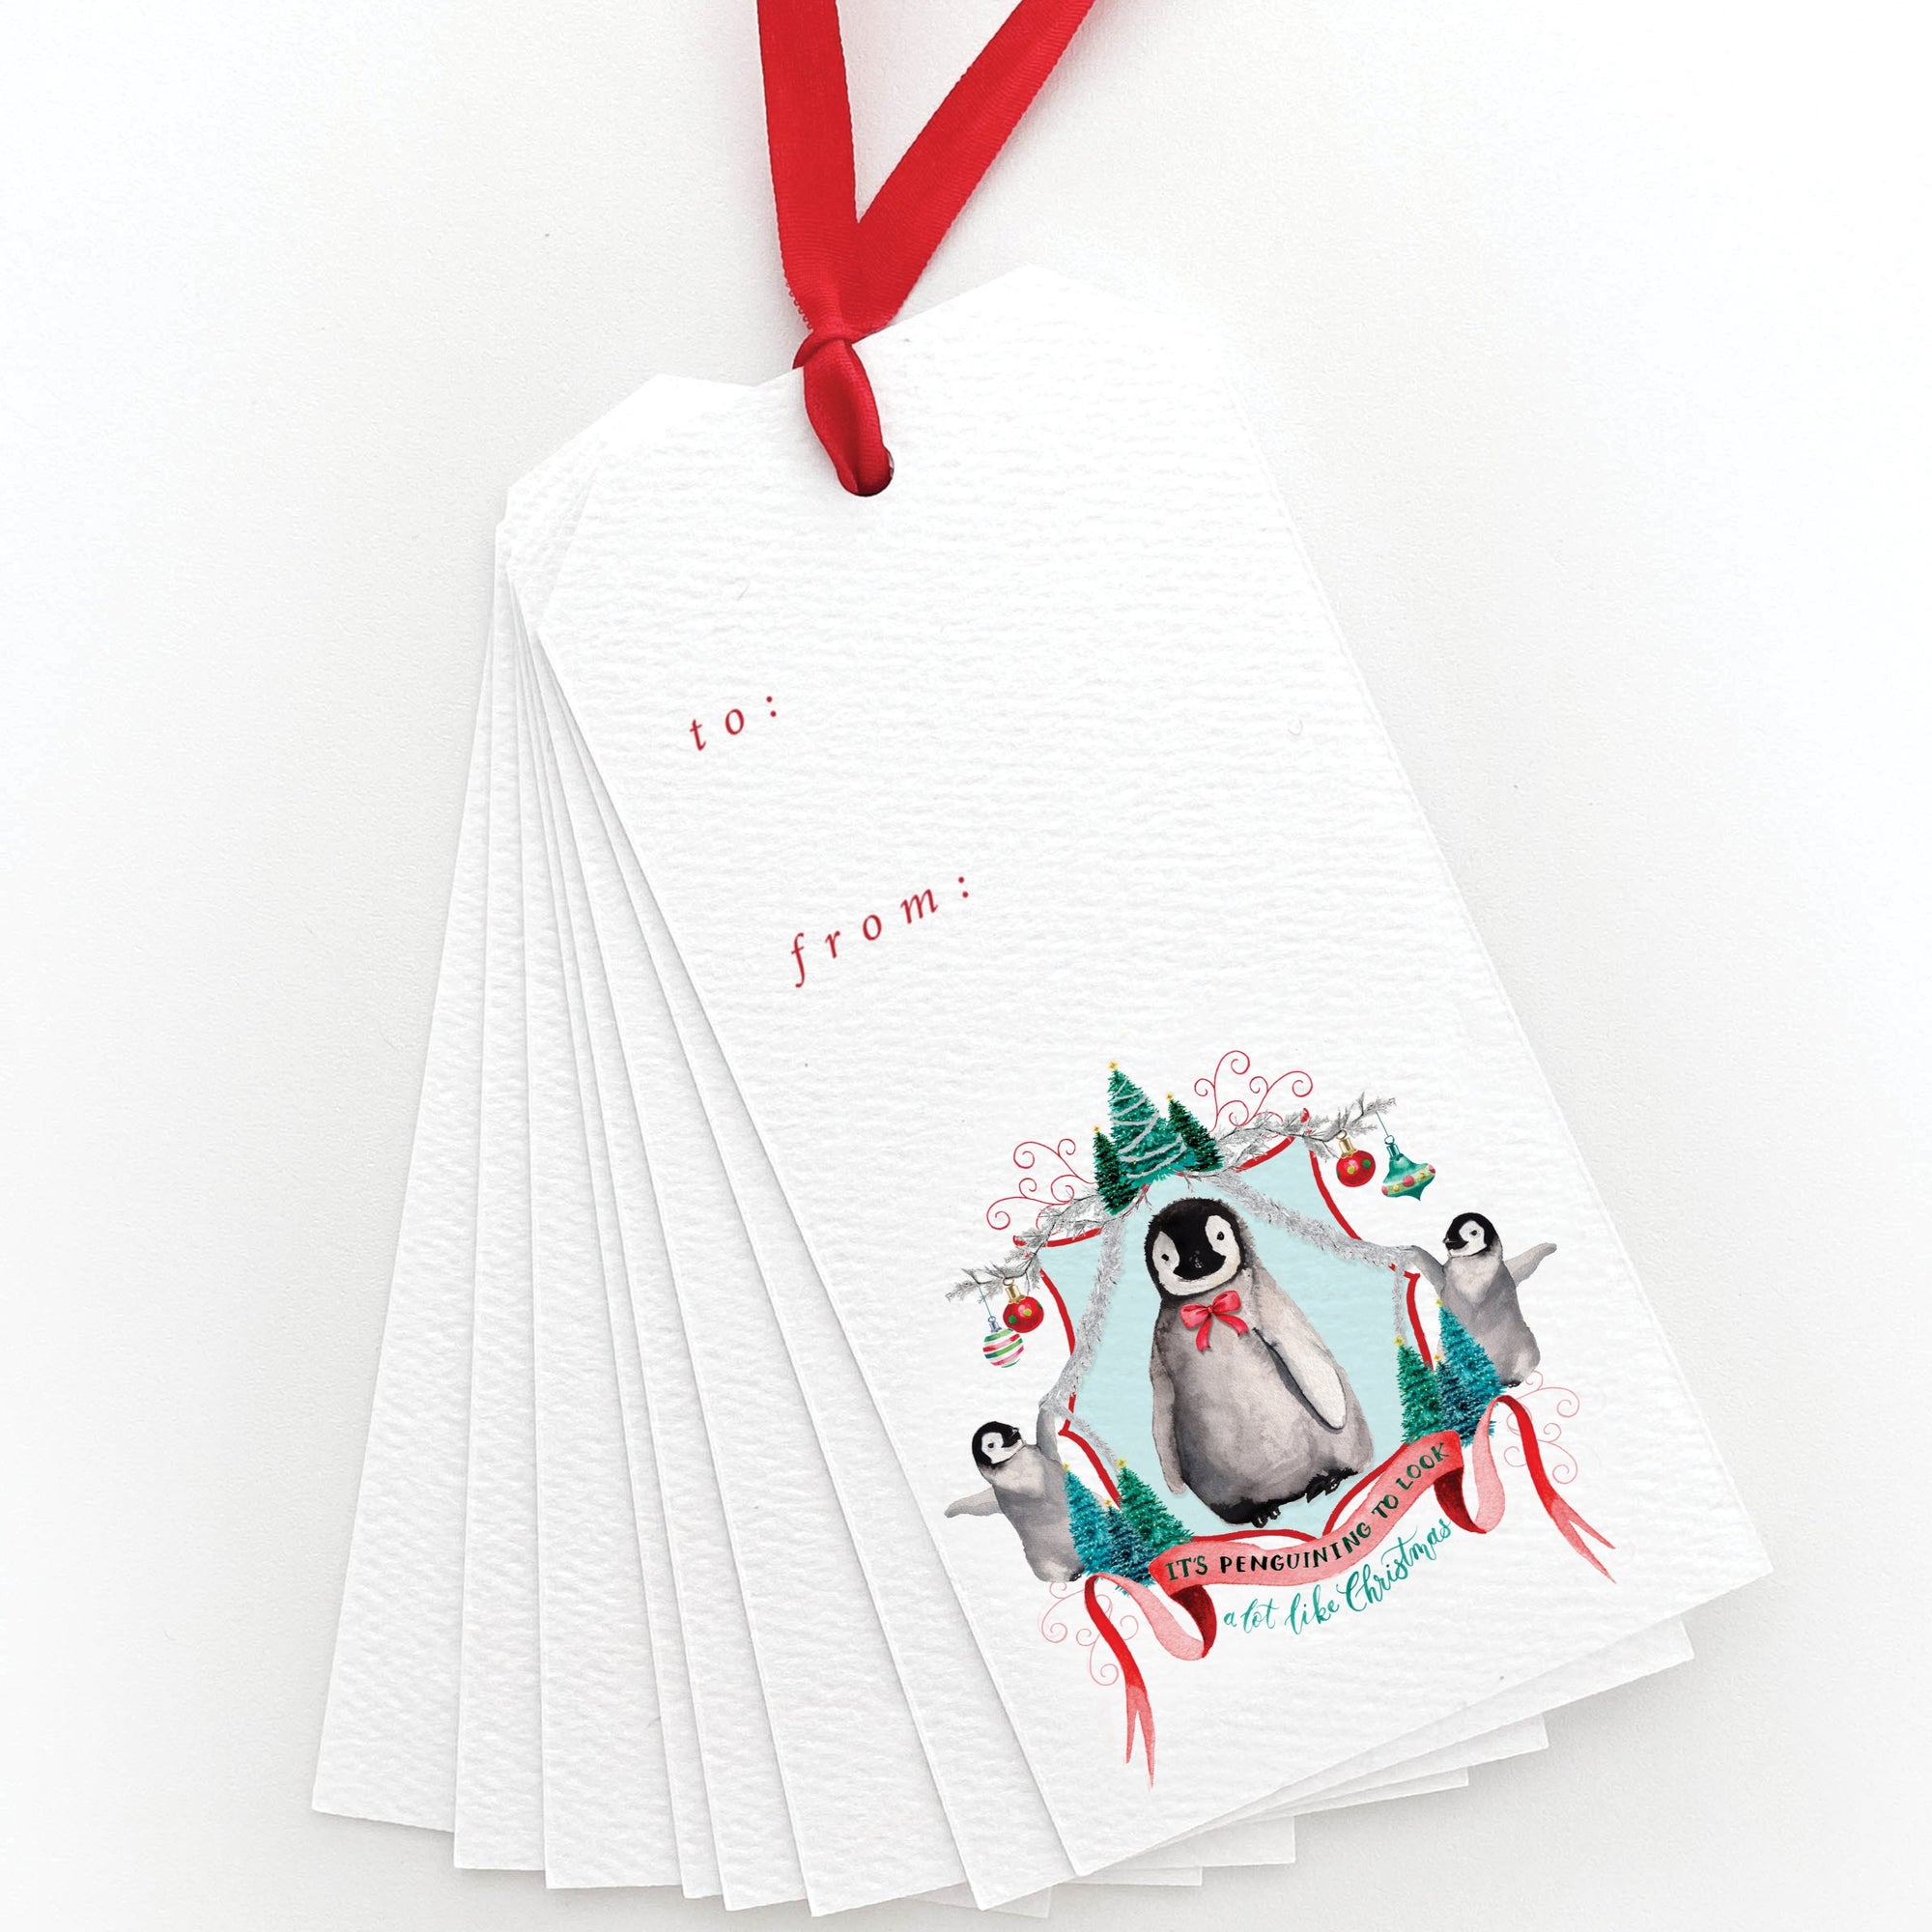 It's Penguining to Look a Lot Like Christmas Gift Tags